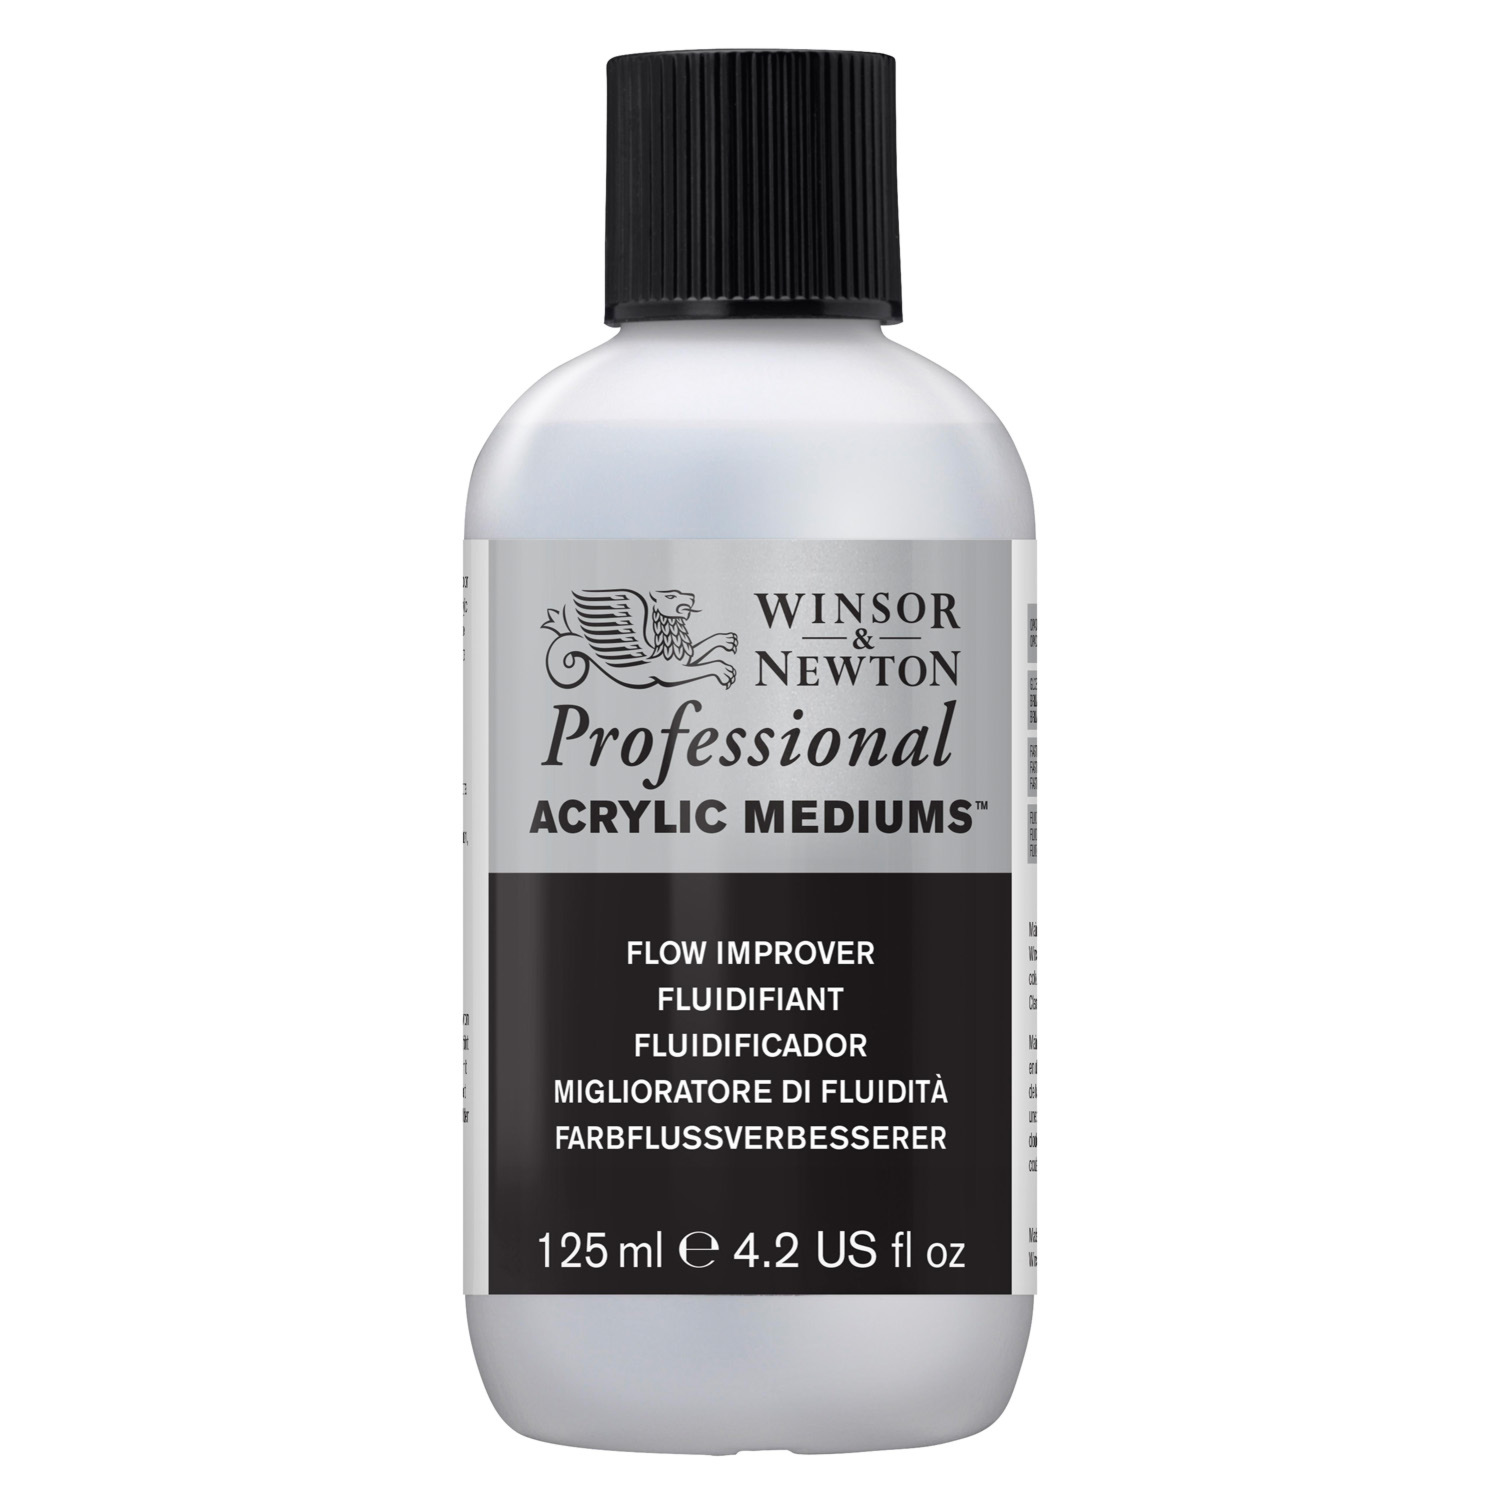 Winsor and Newton Professional Acrylic Flow Improver - 125ml Image